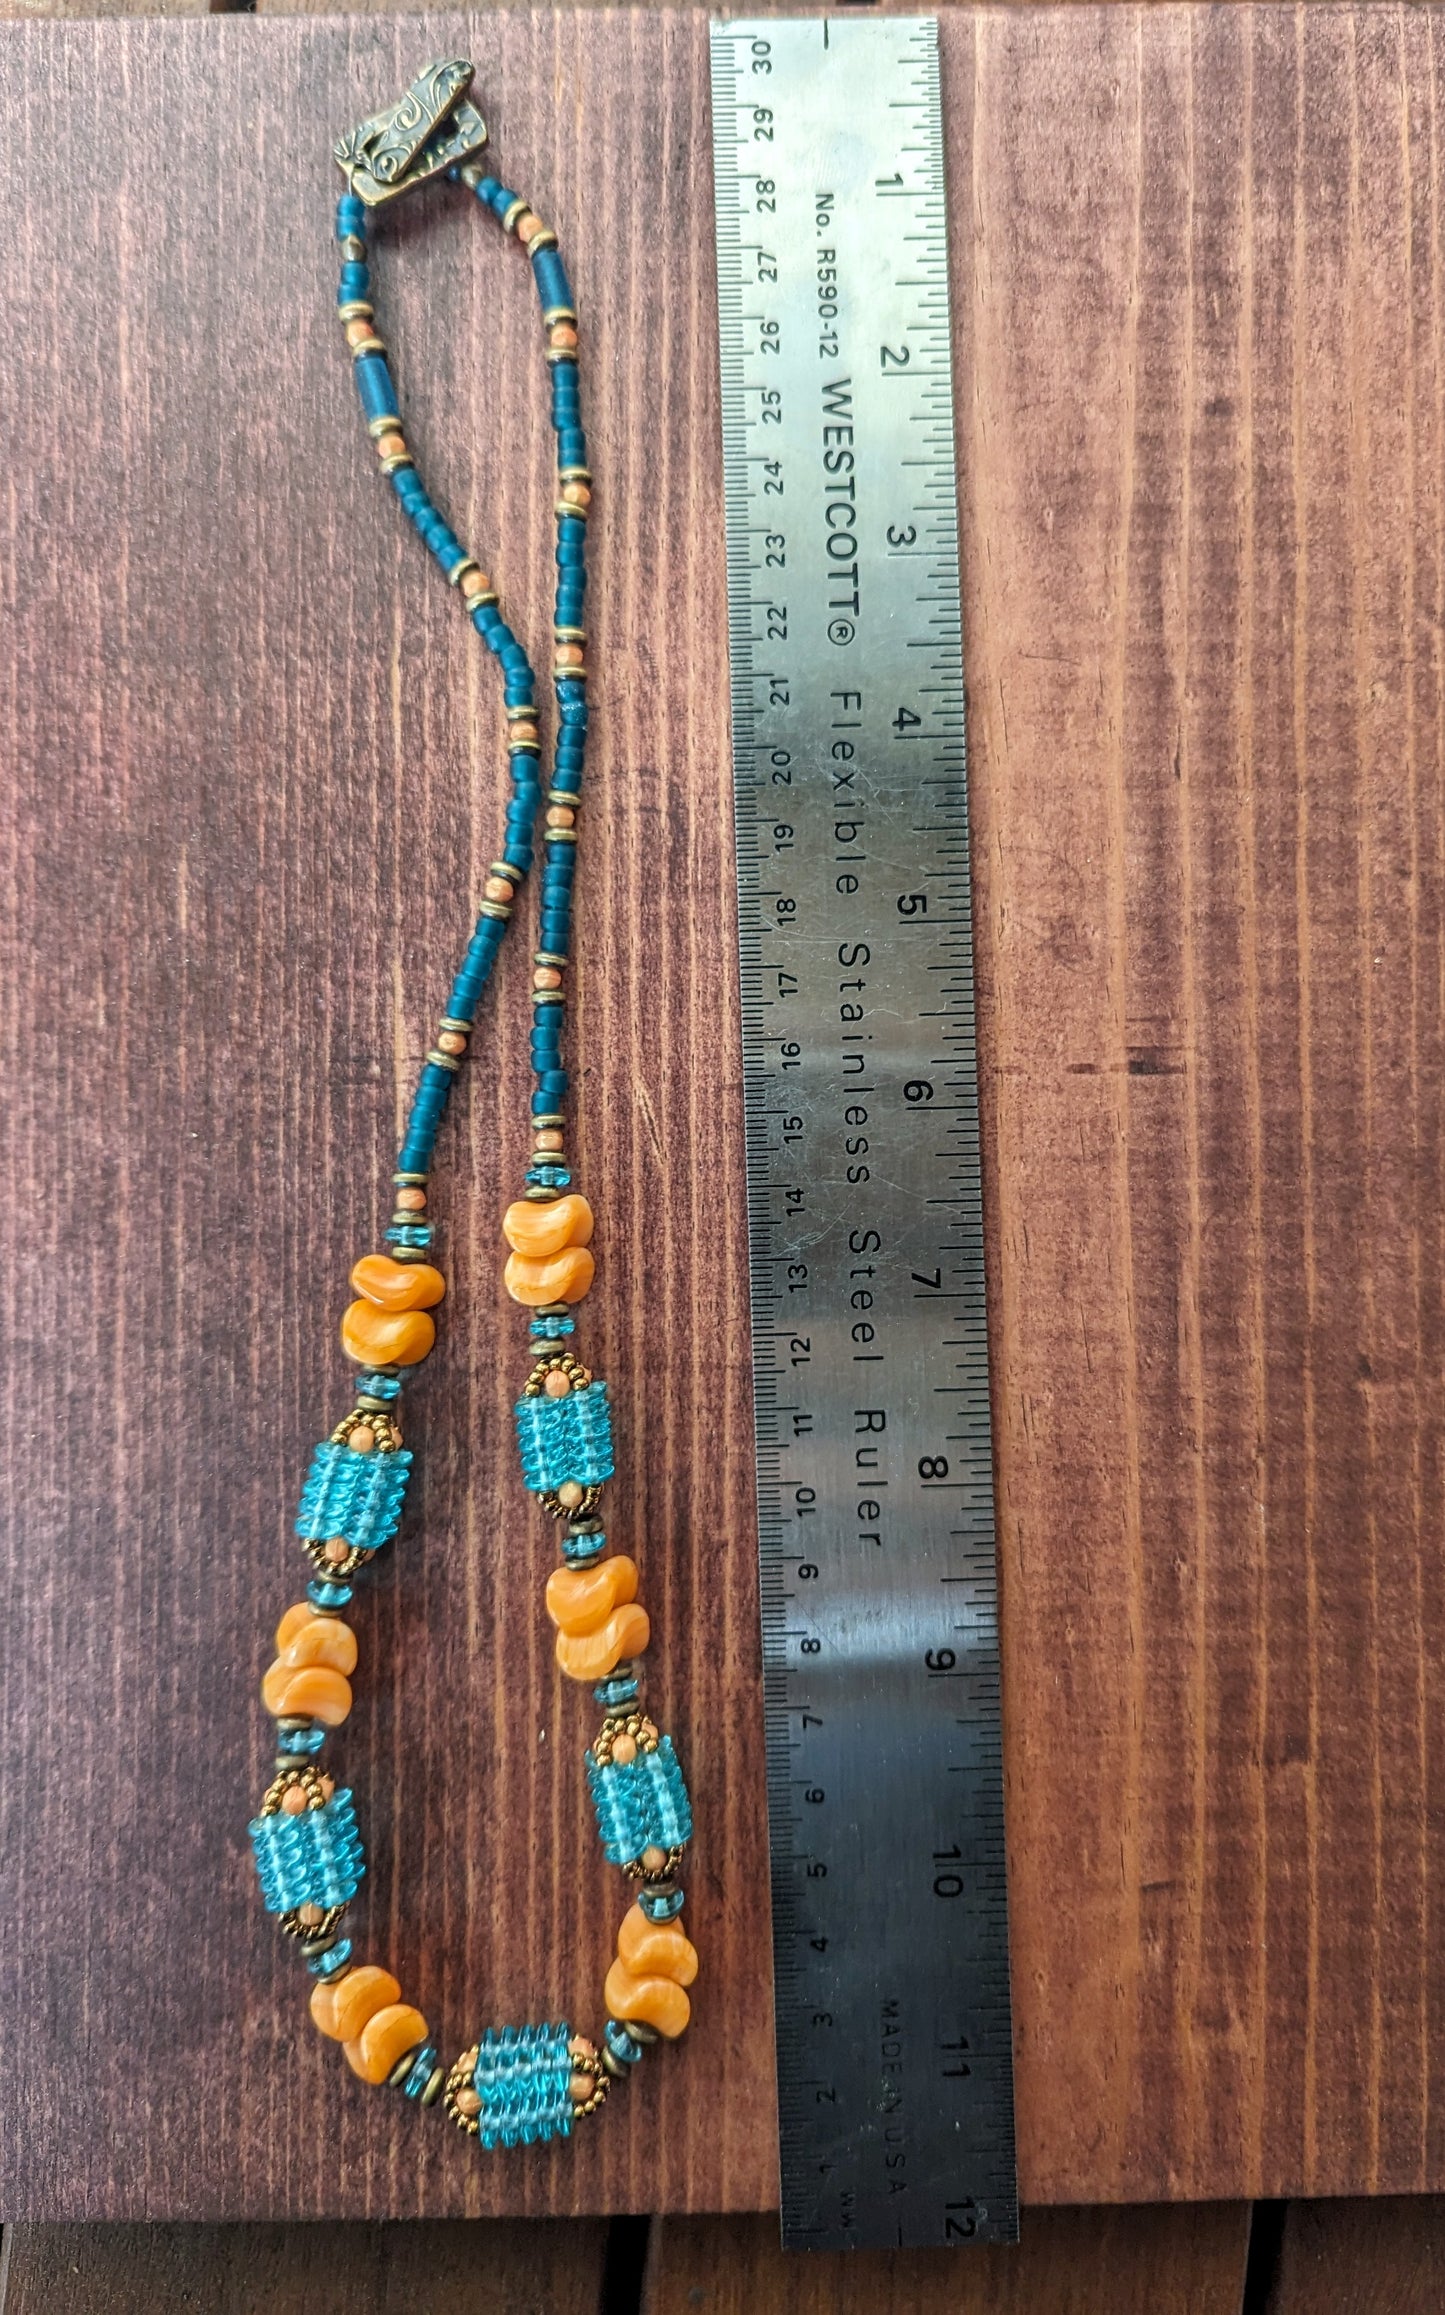 A light orange and transparent teal necklace laid out in a loop alongside a metal ruler.  The necklace has orange beads shaped like waves and teal beaded beads that are made up of four columns of teal discs.